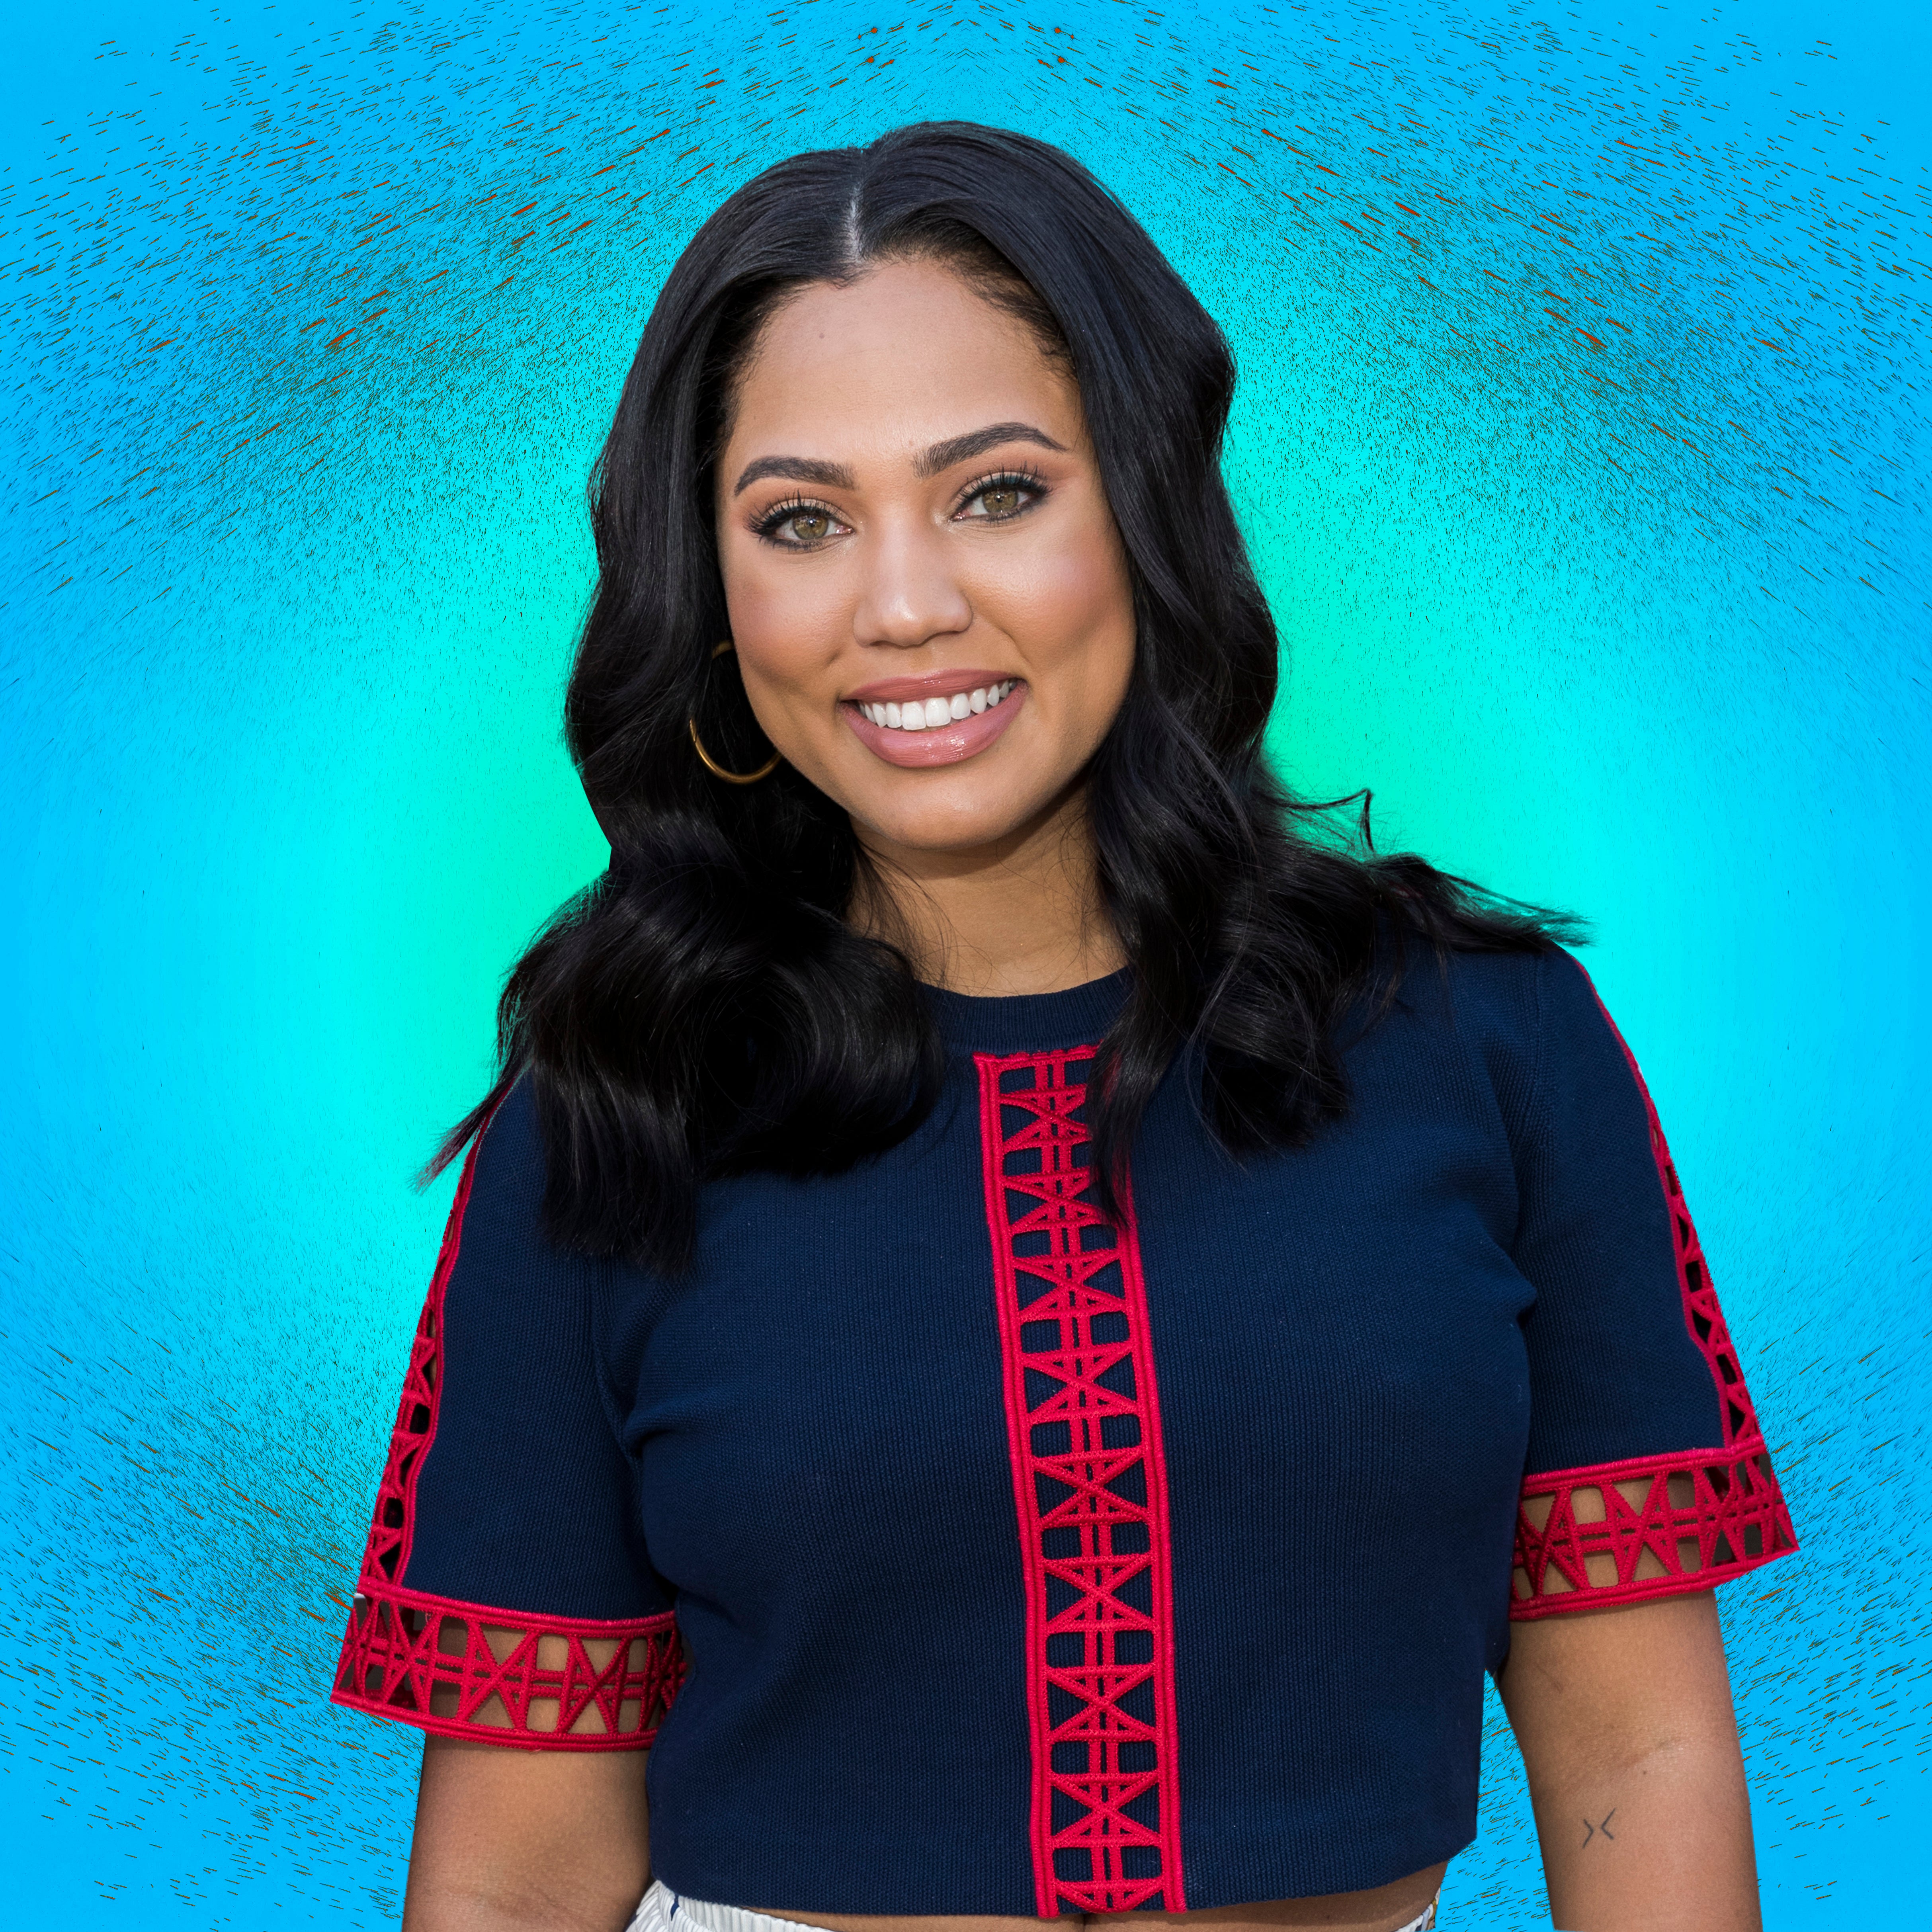 Ayesha Curry Is Whipping Up a Recipe For A Winning Food Empire
